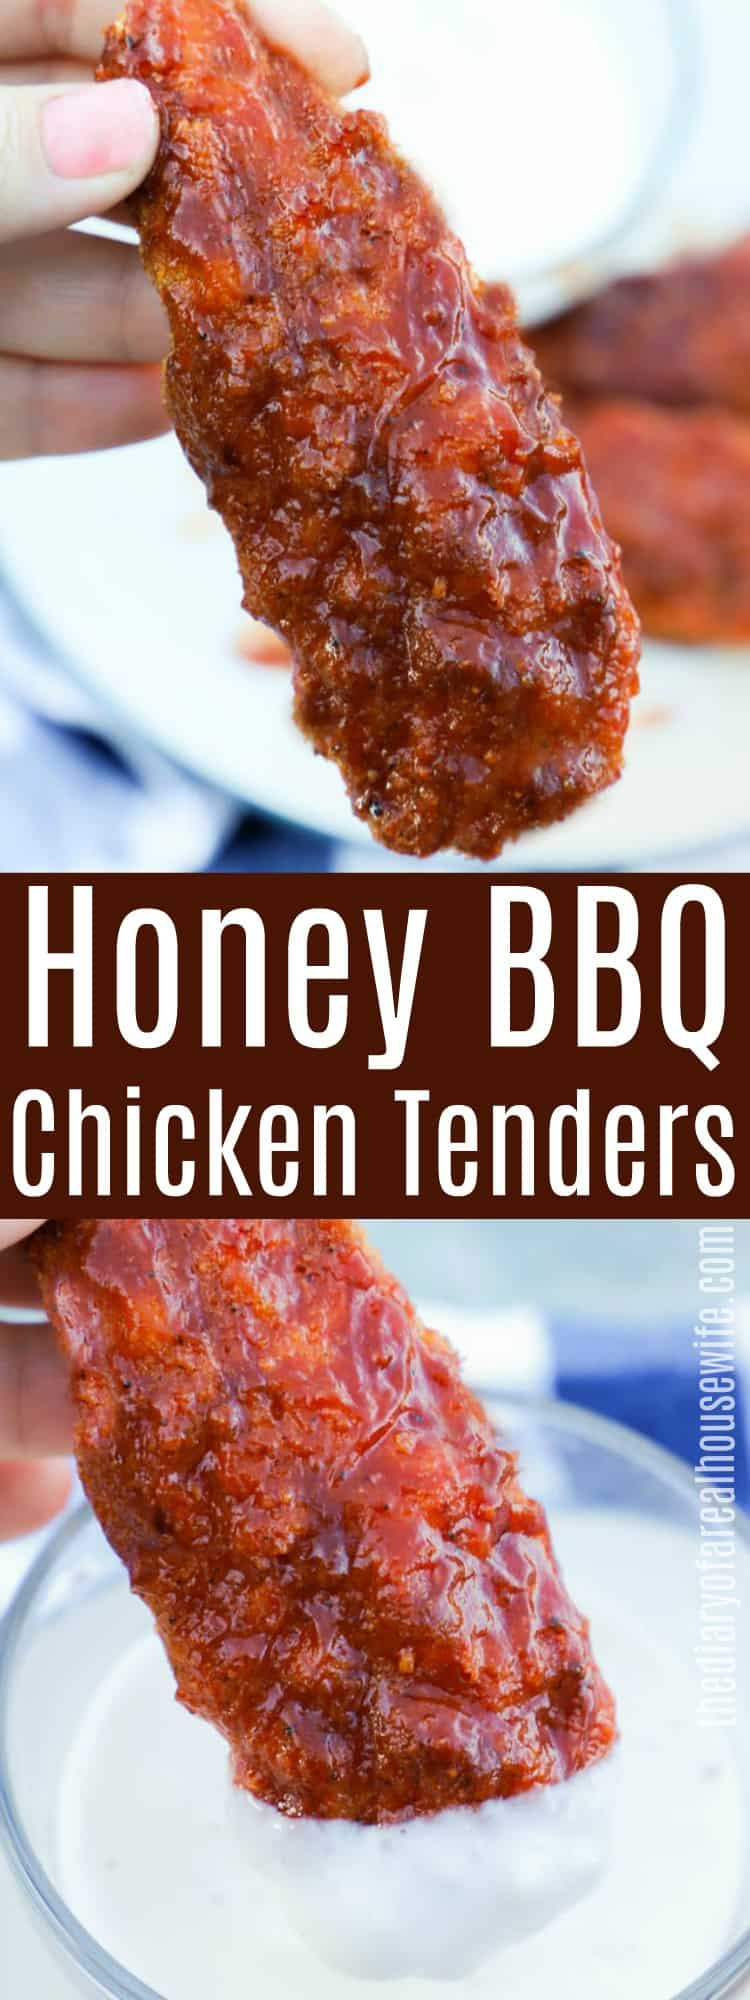 Bbq Chicken Tenders
 Honey BBQ Chicken Tenders • The Diary of a Real Housewife